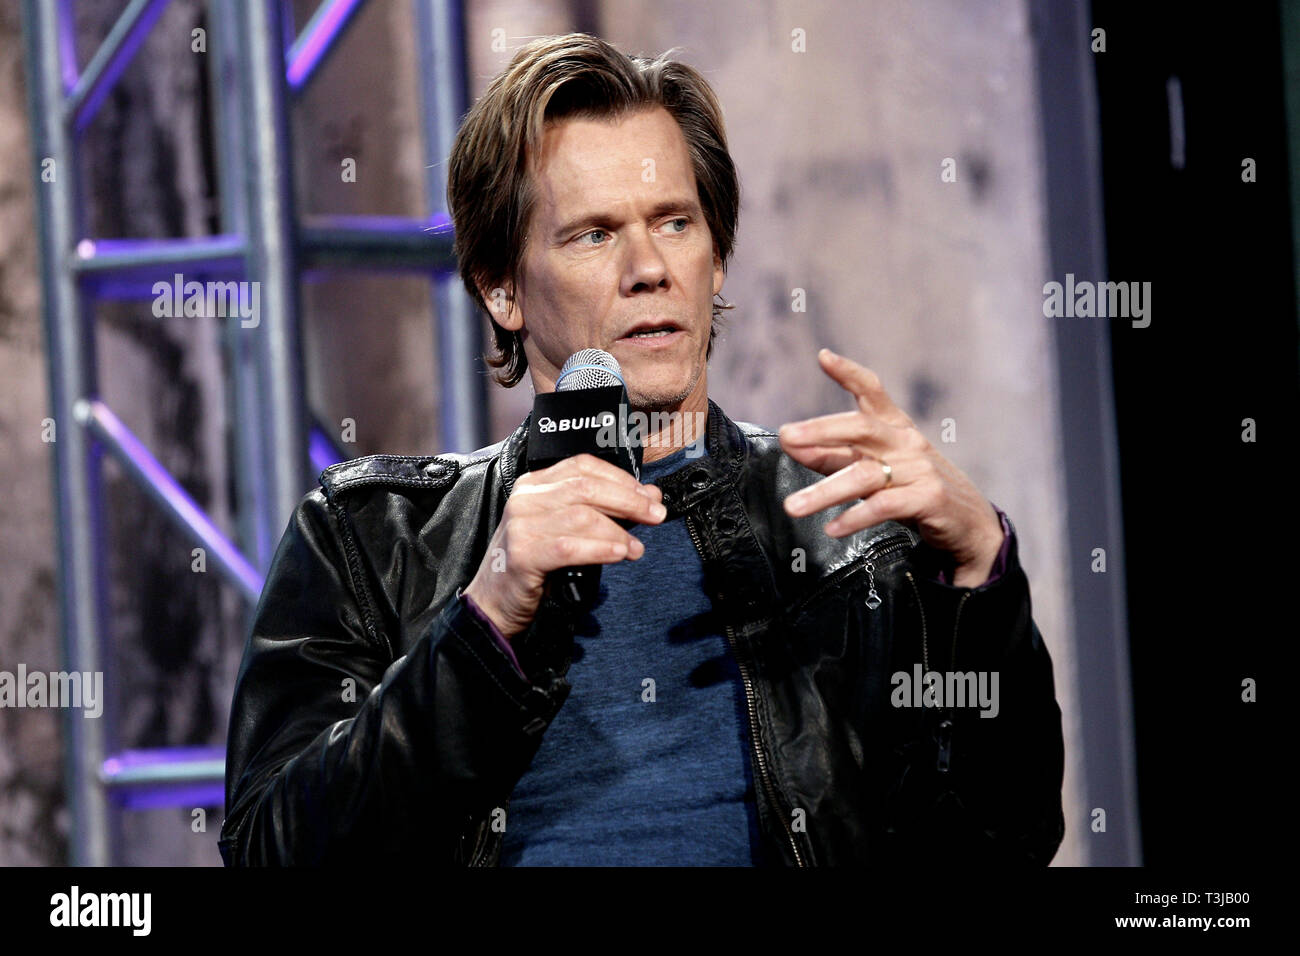 Page 2 Kevin Bacon 15 High Resolution Stock Photography And Images Alamy